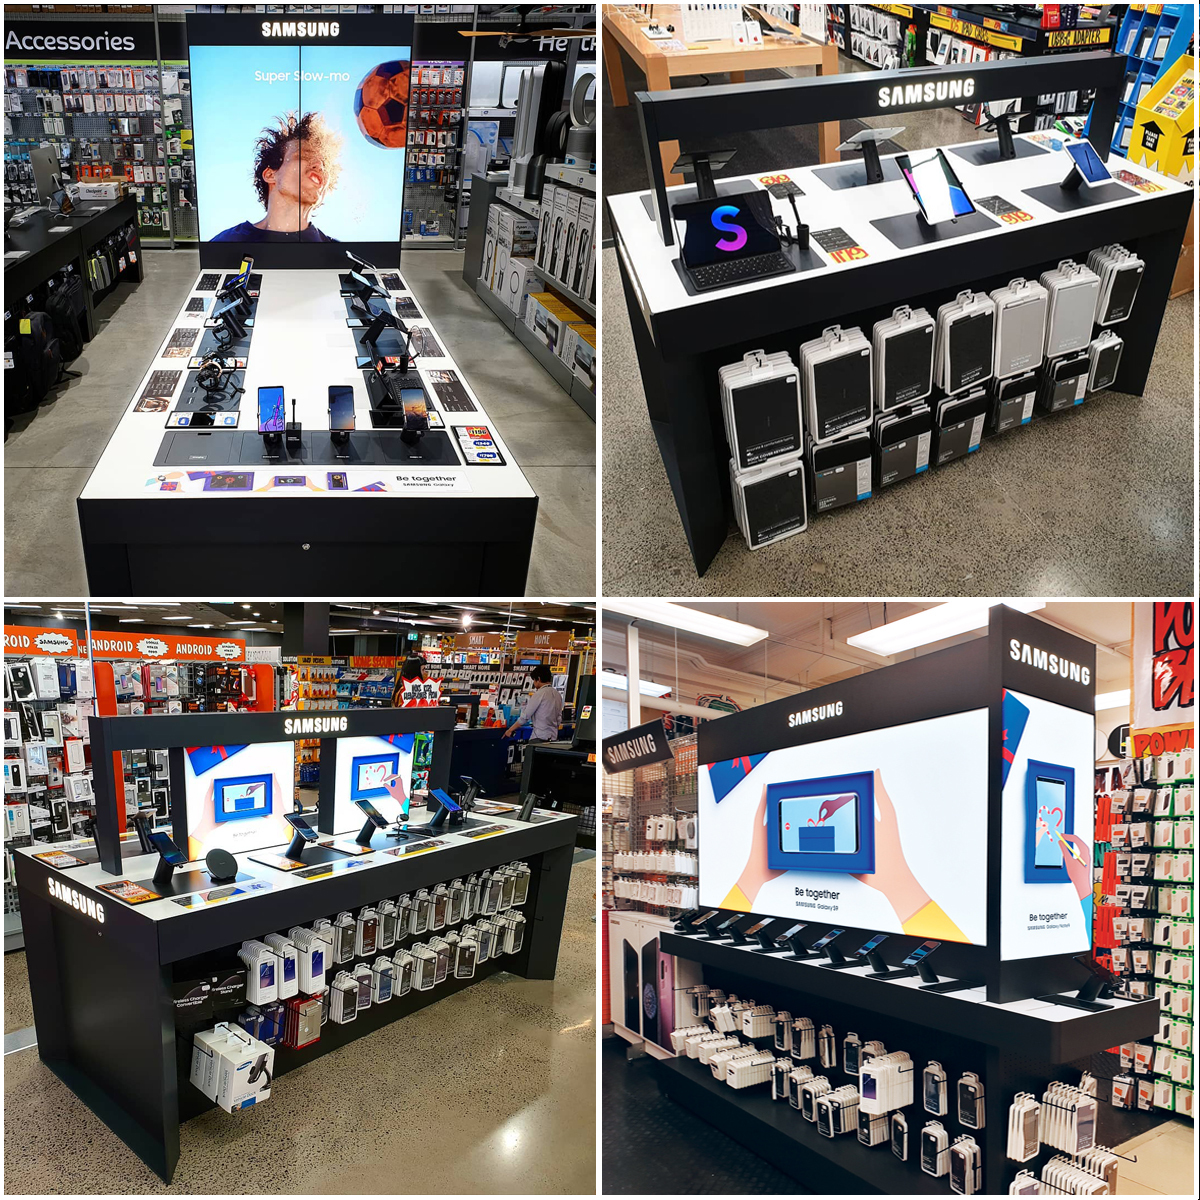 Samsung mobile in-store display with multiple devices available for testing